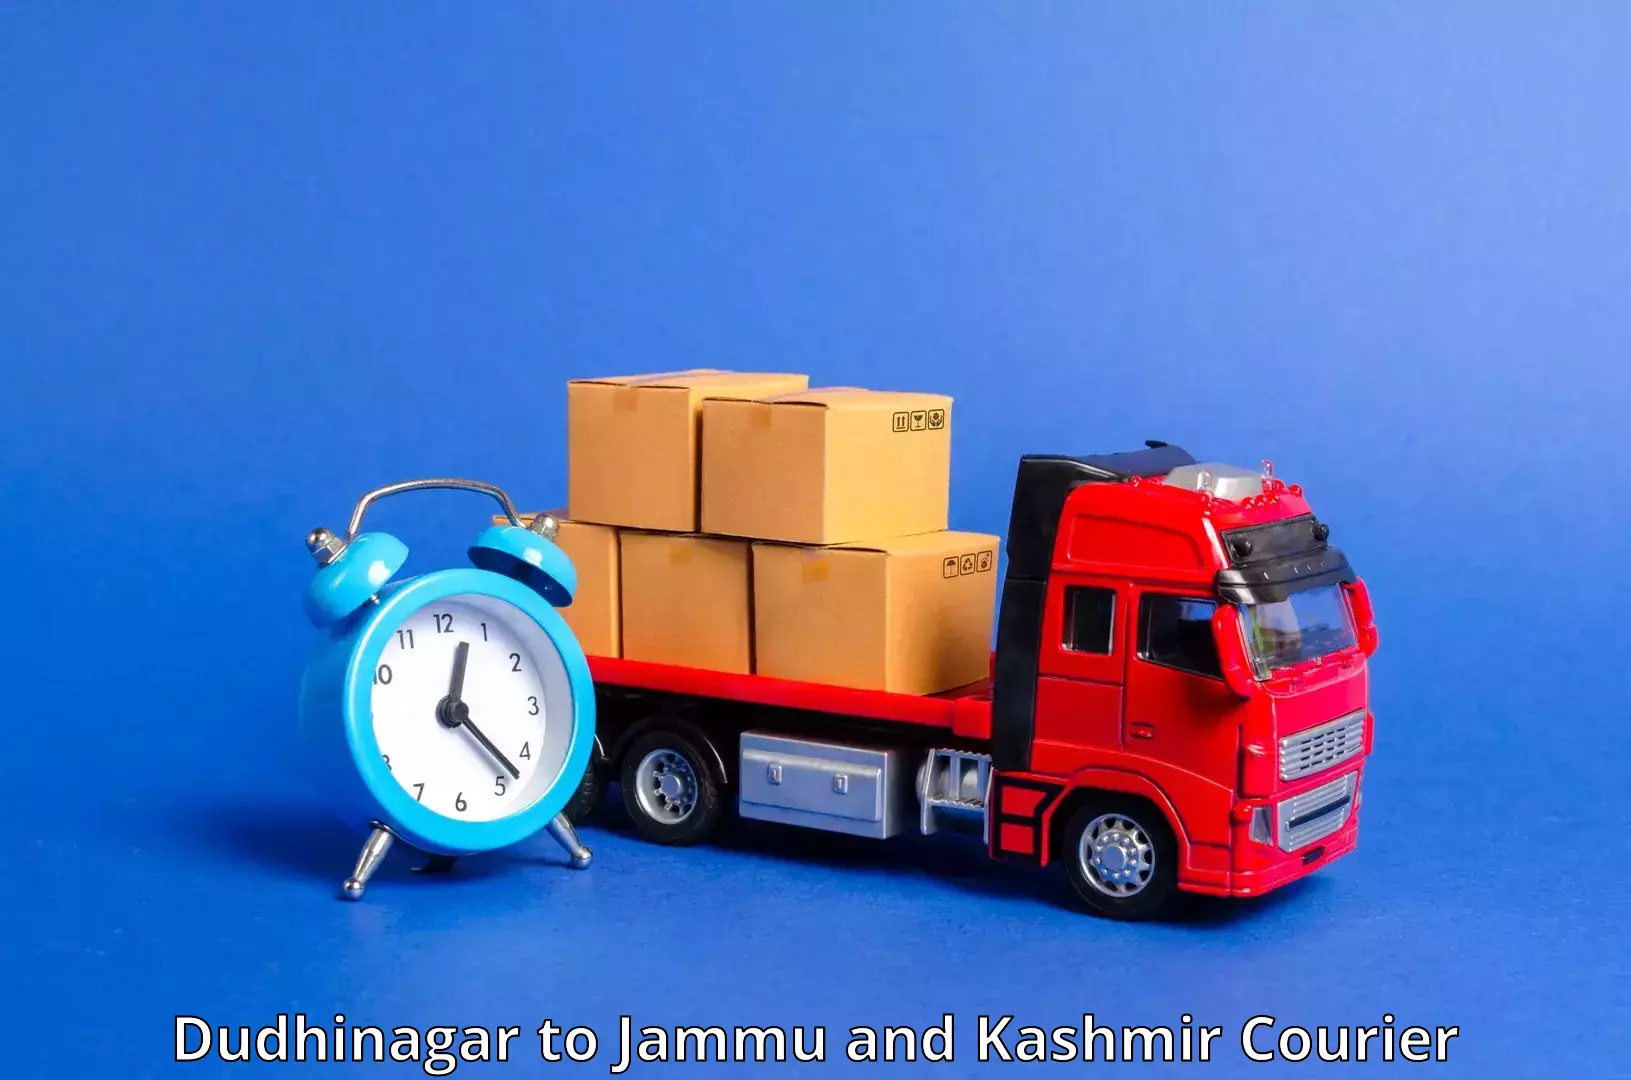 Reliable package handling Dudhinagar to Jammu and Kashmir